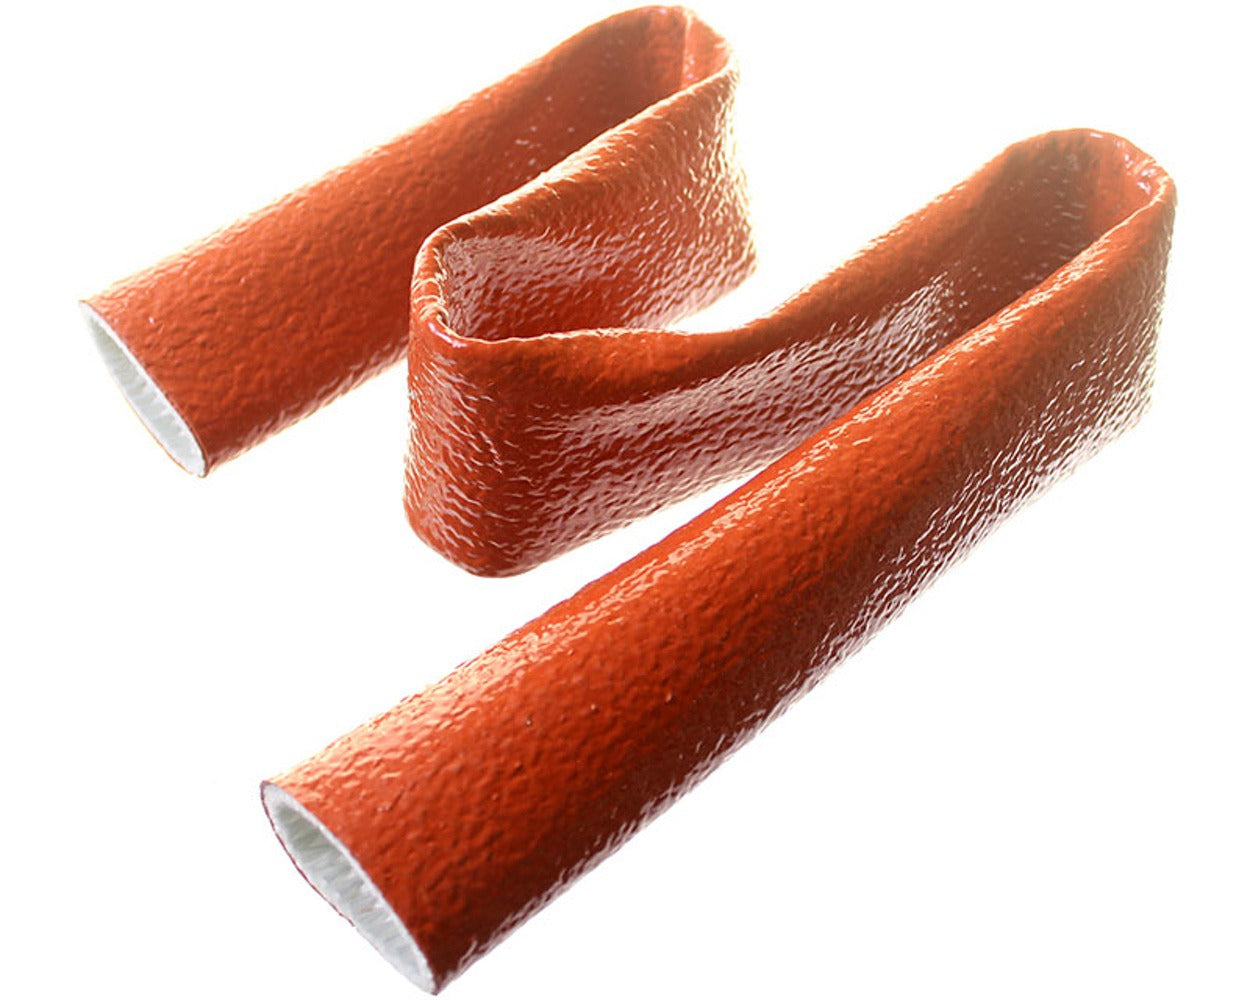 X30 Special Silicon Exhaust Wrap 1M Length